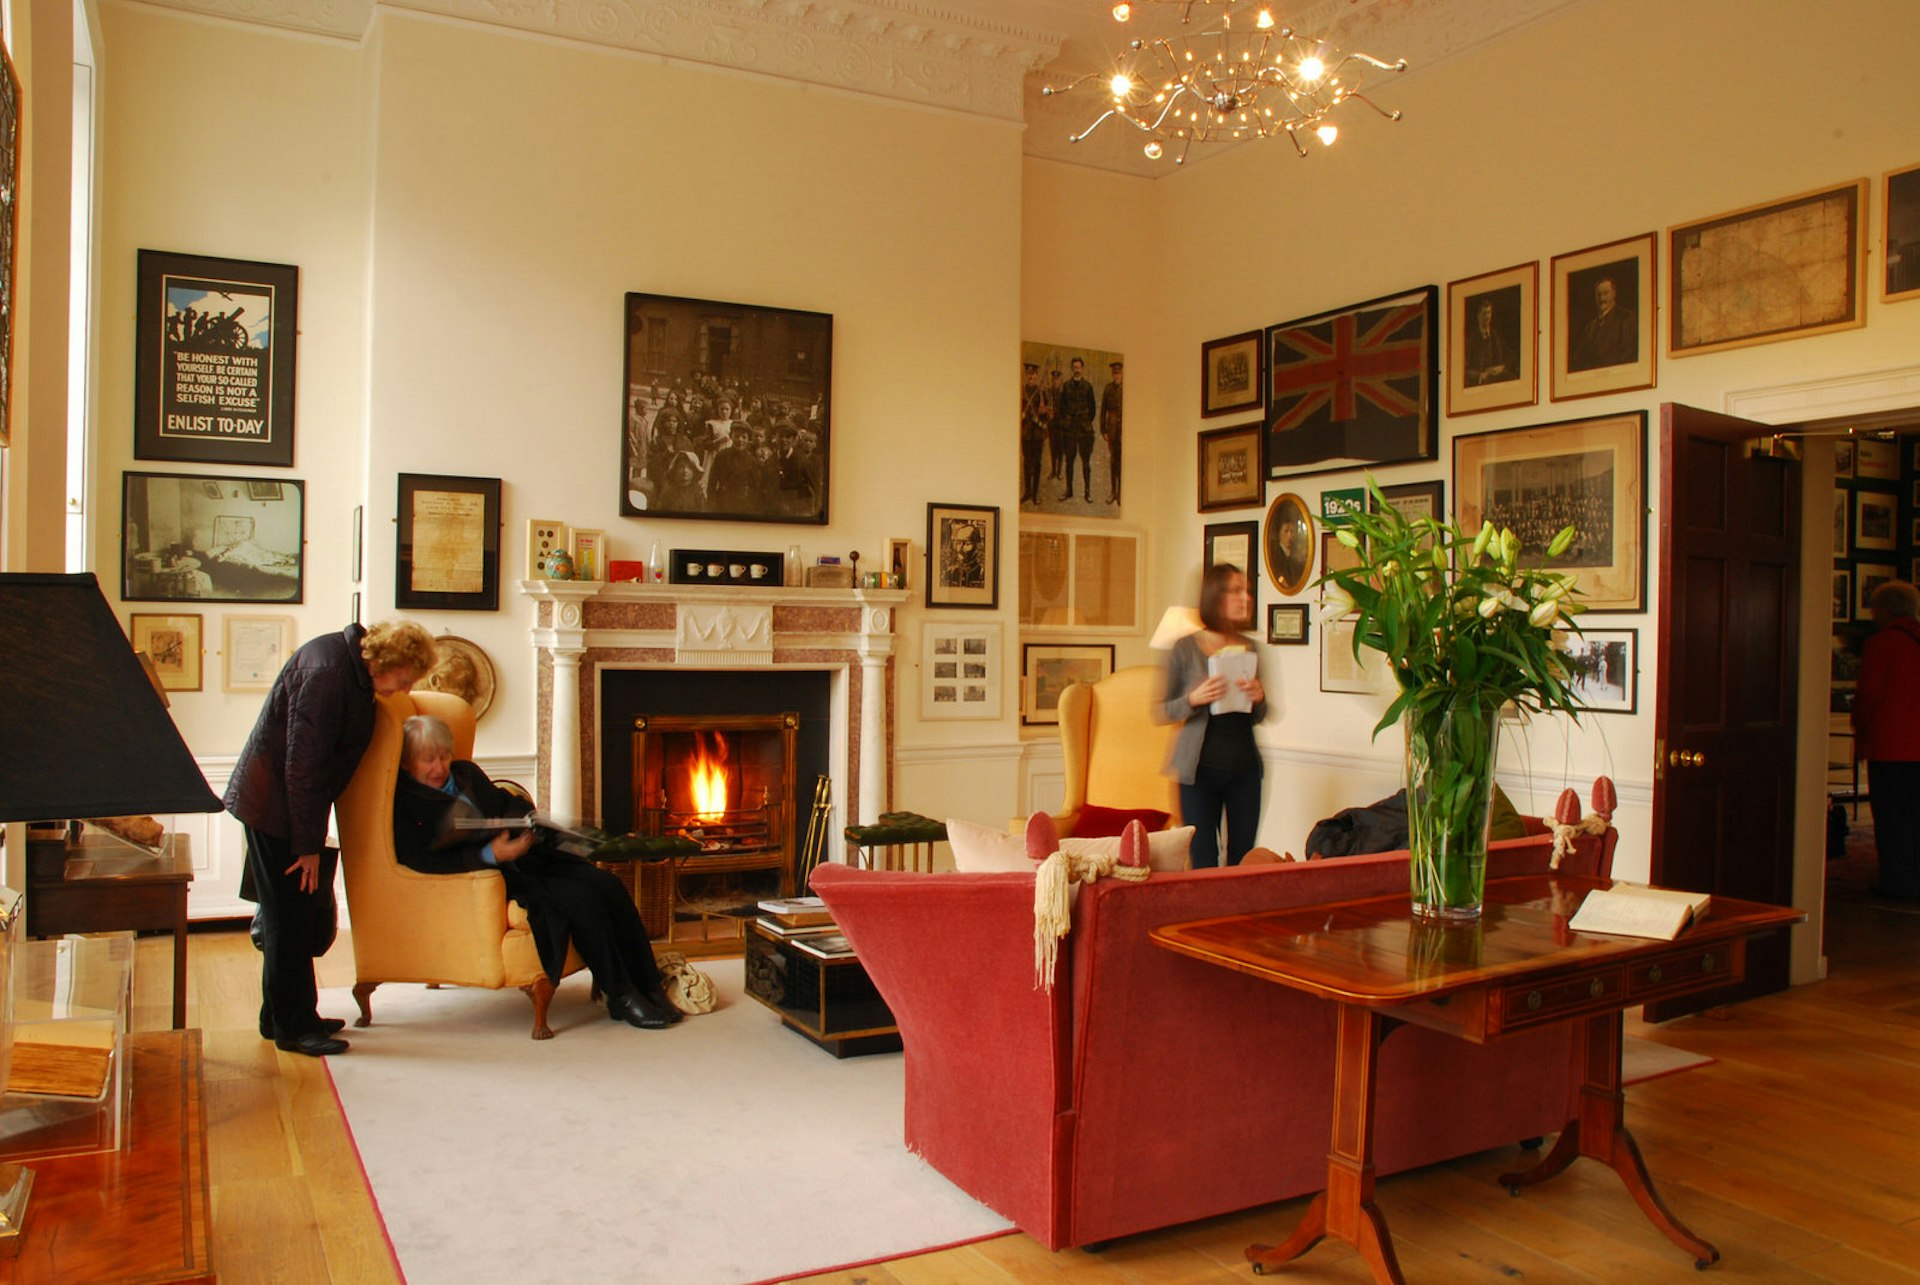 An interior room of the Little Museum of Dublin, which occupies a lovely Georgian townhouse